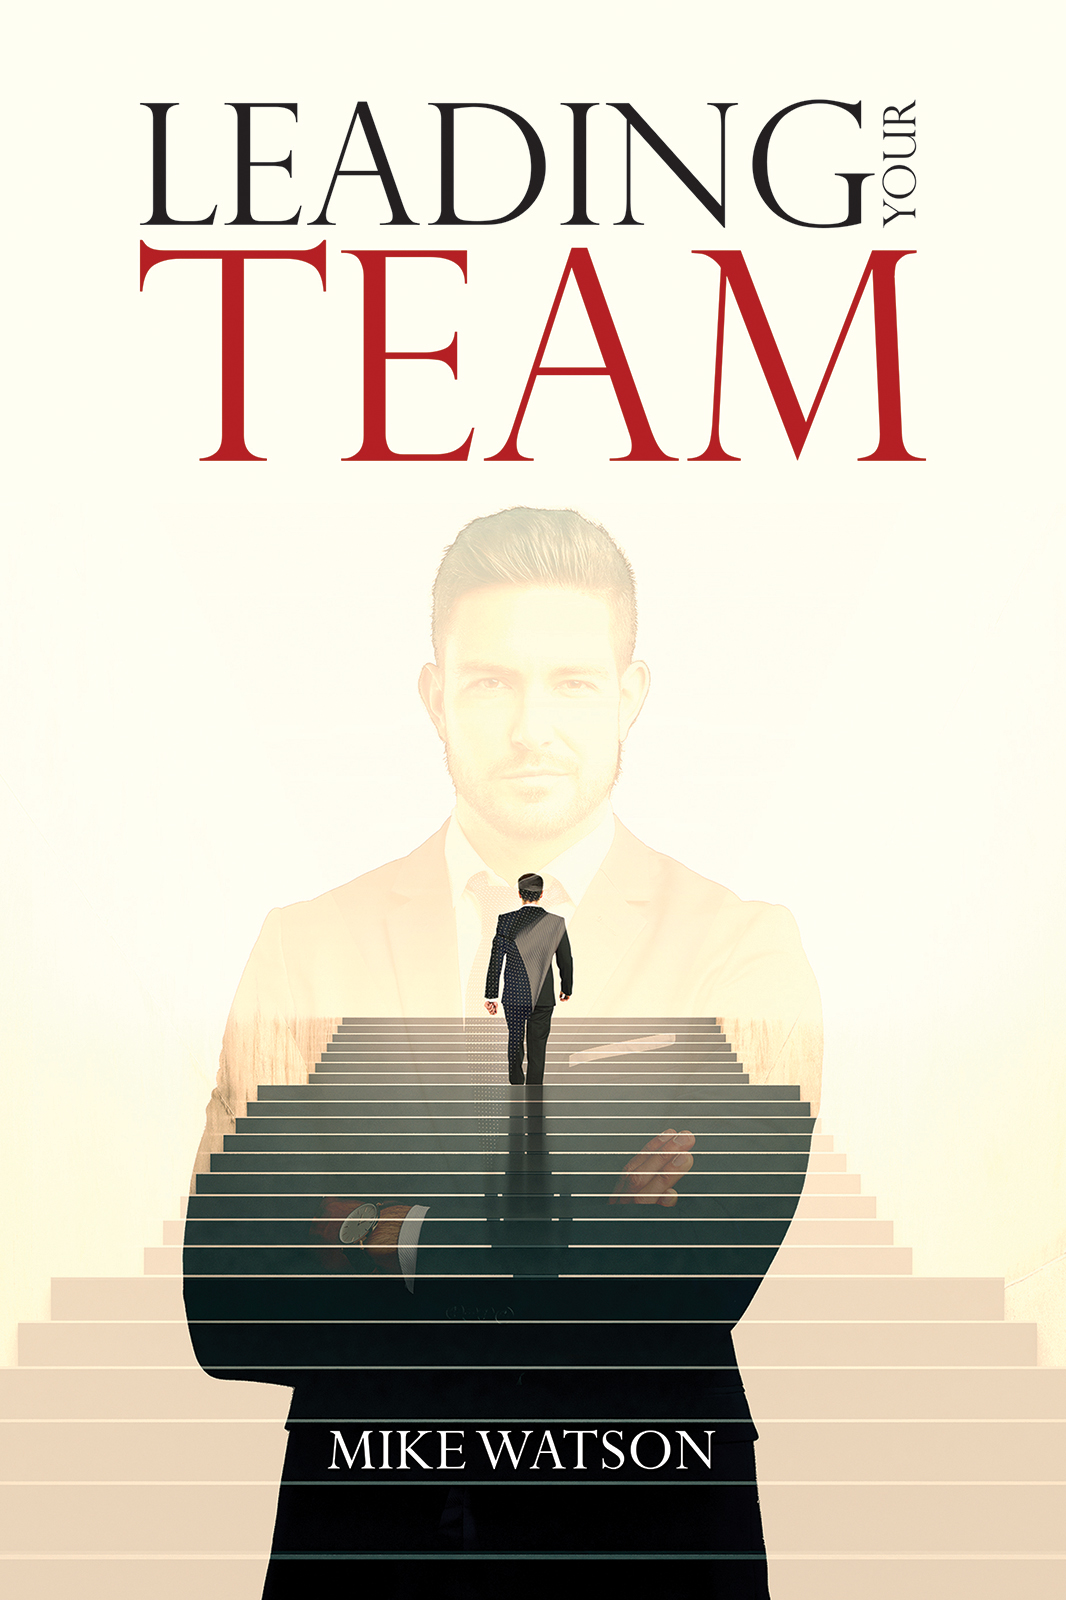 This image is the cover for the book Leading Your Team